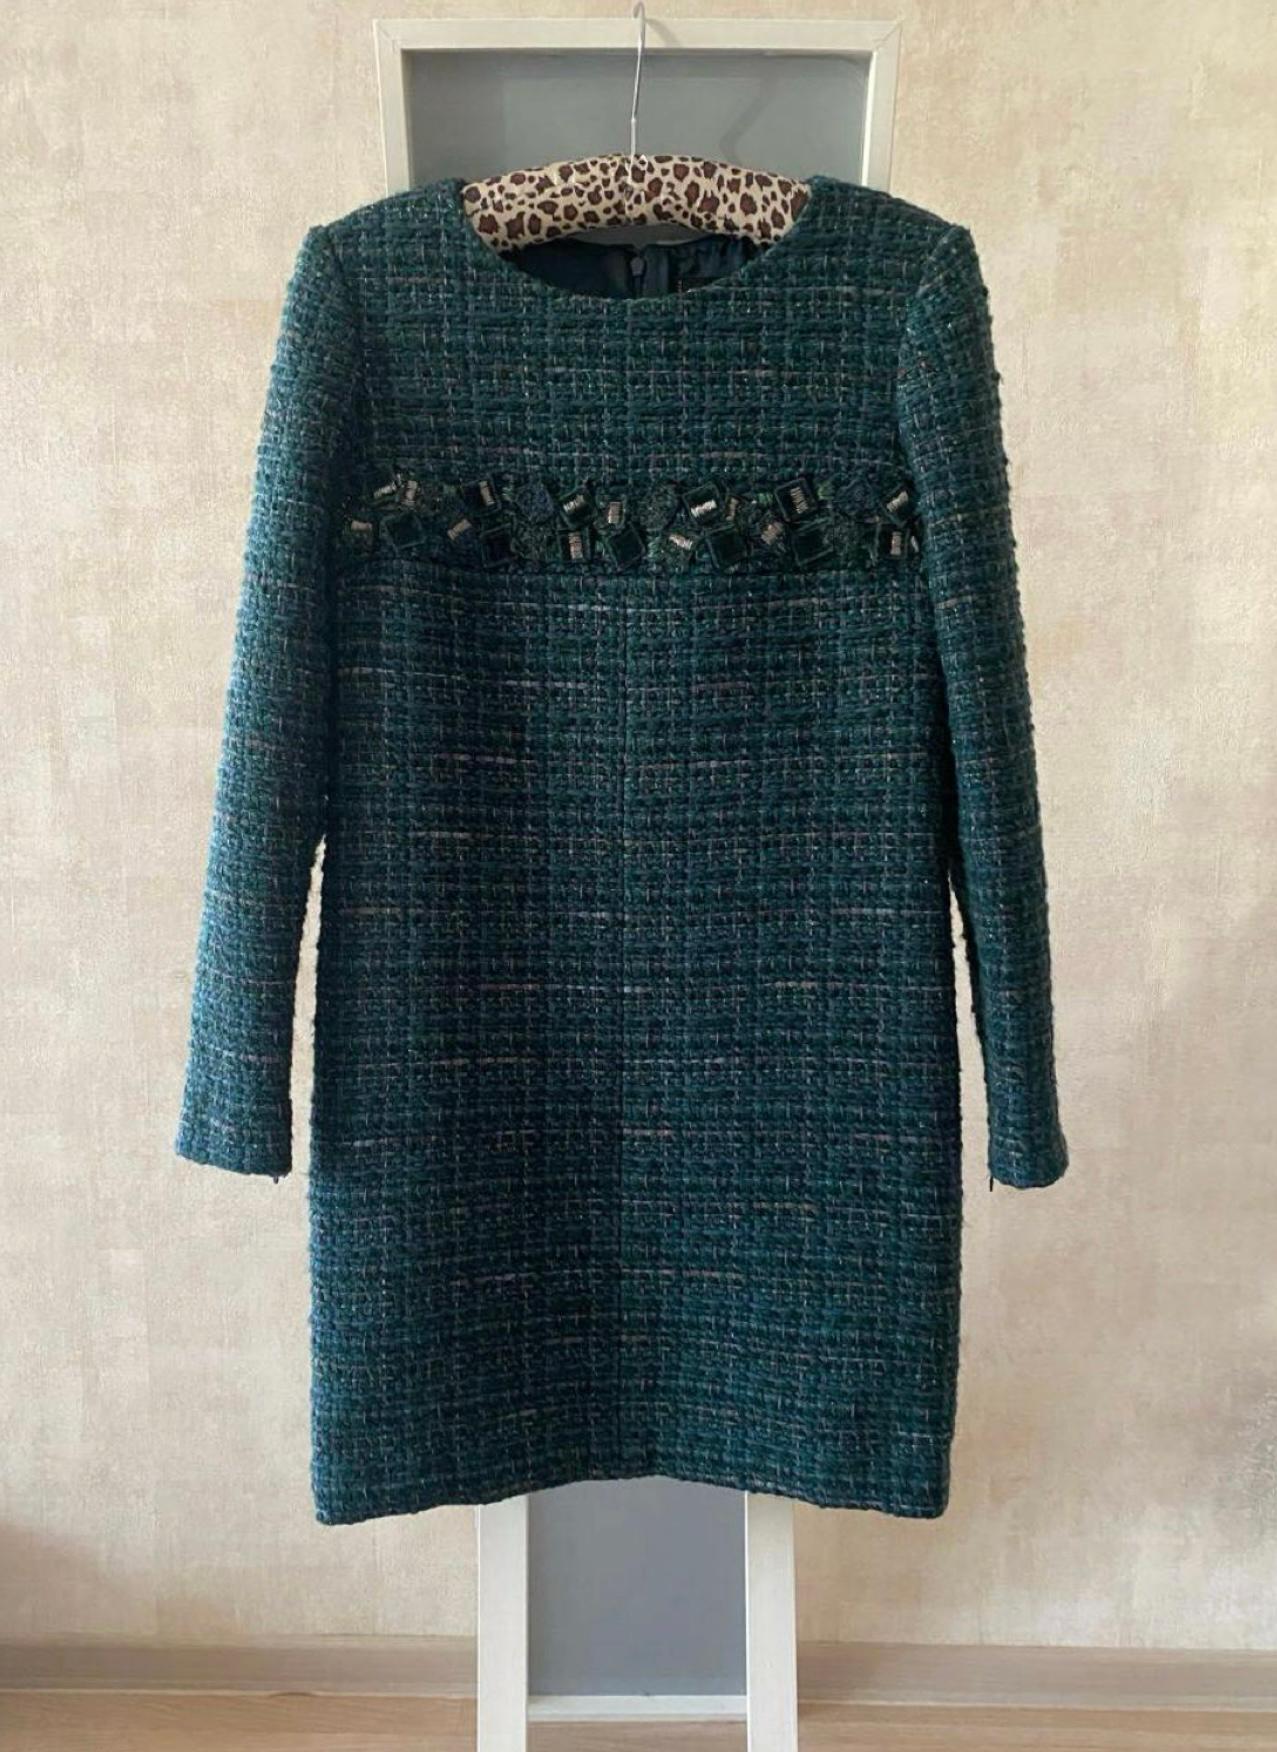 7K$ Runway Emerald Green Lesage Tweed Dress In Excellent Condition For Sale In Dubai, AE